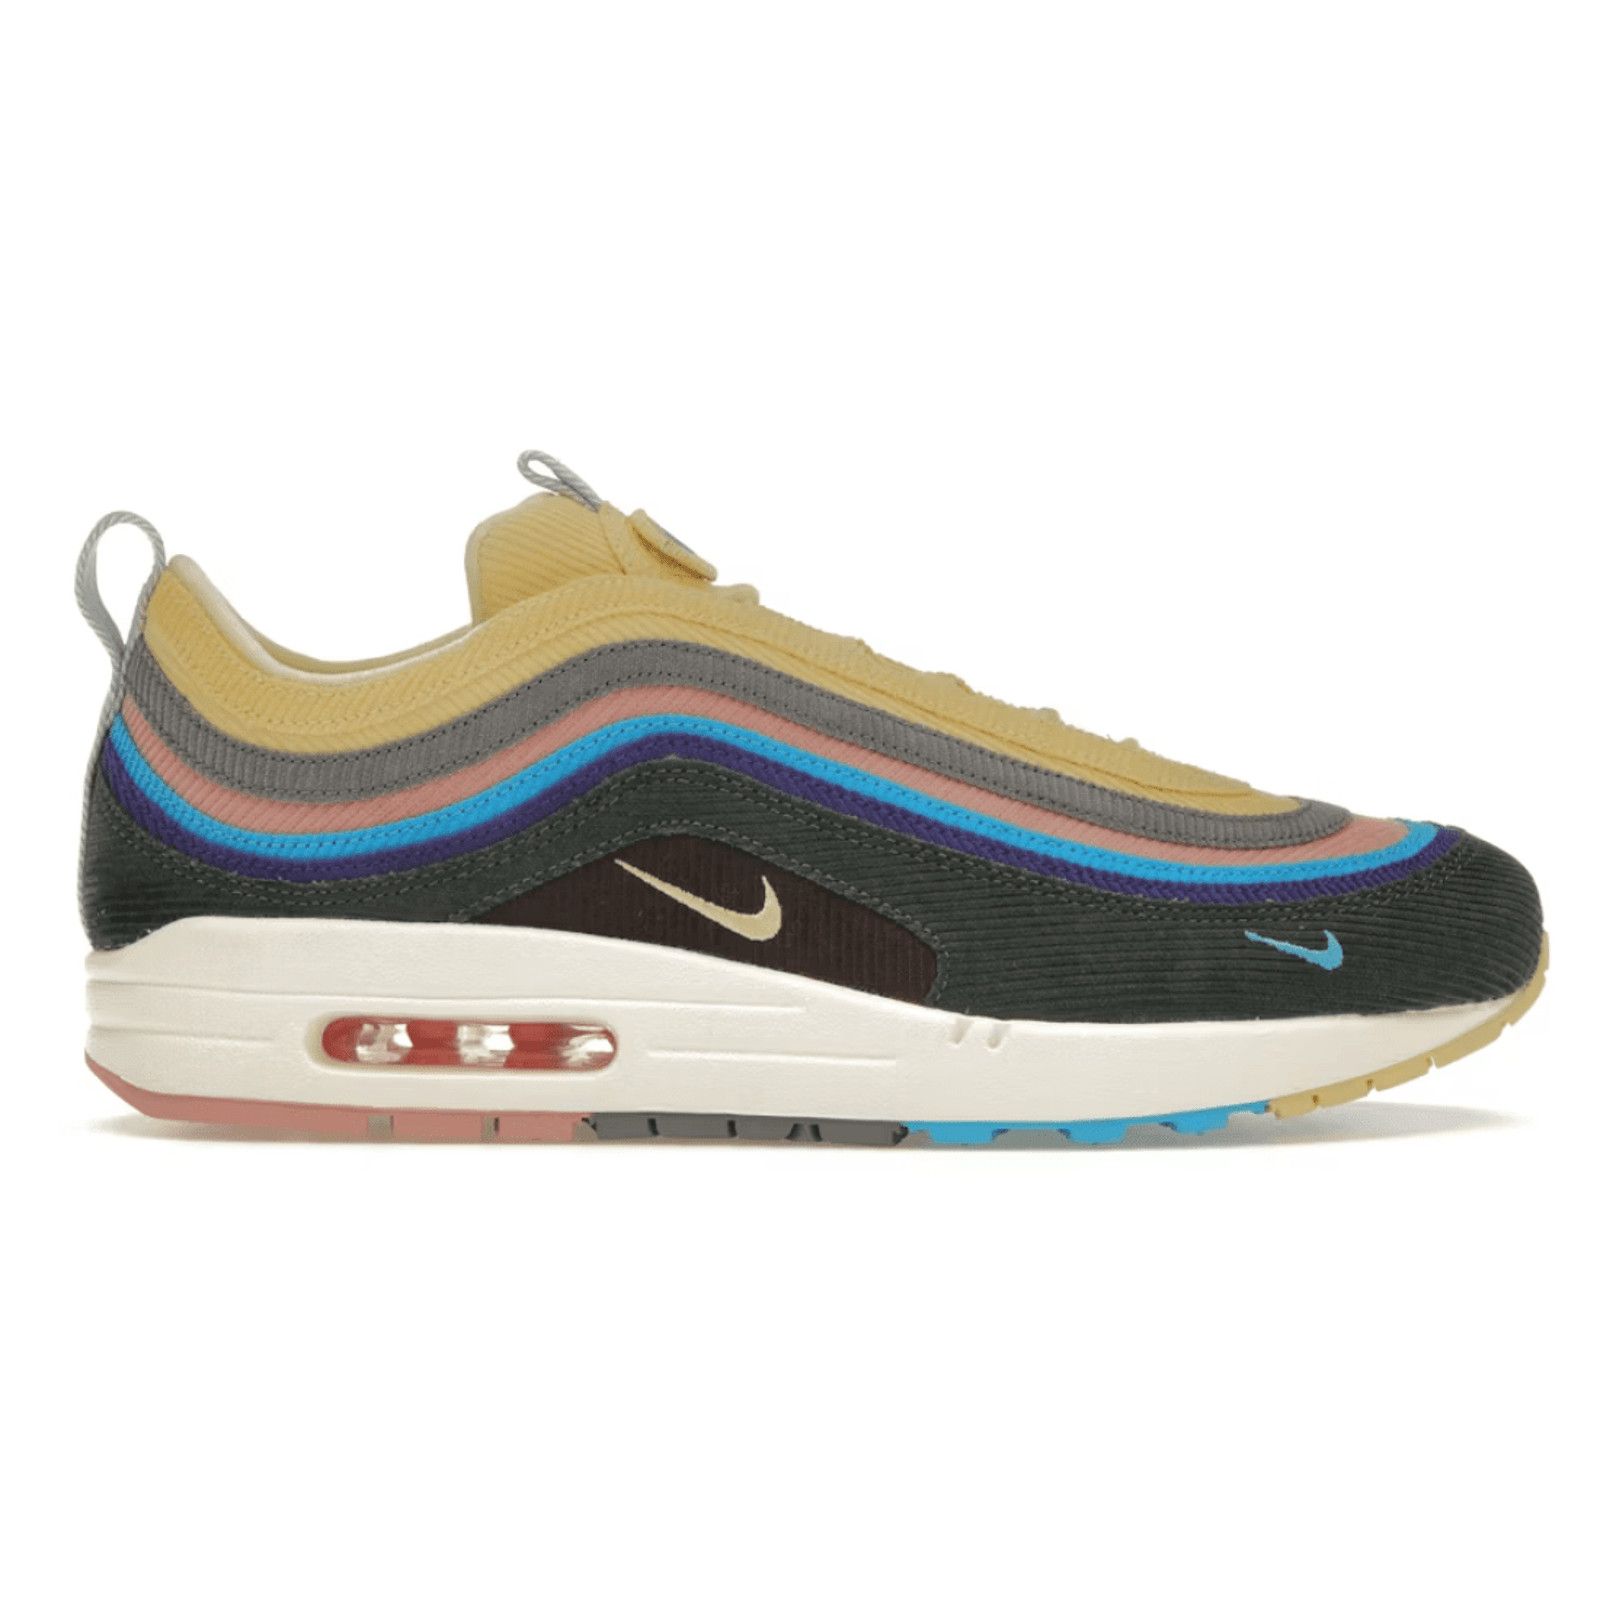 Nike Air Max 1 97 Sean Wotherspoon | Grailed